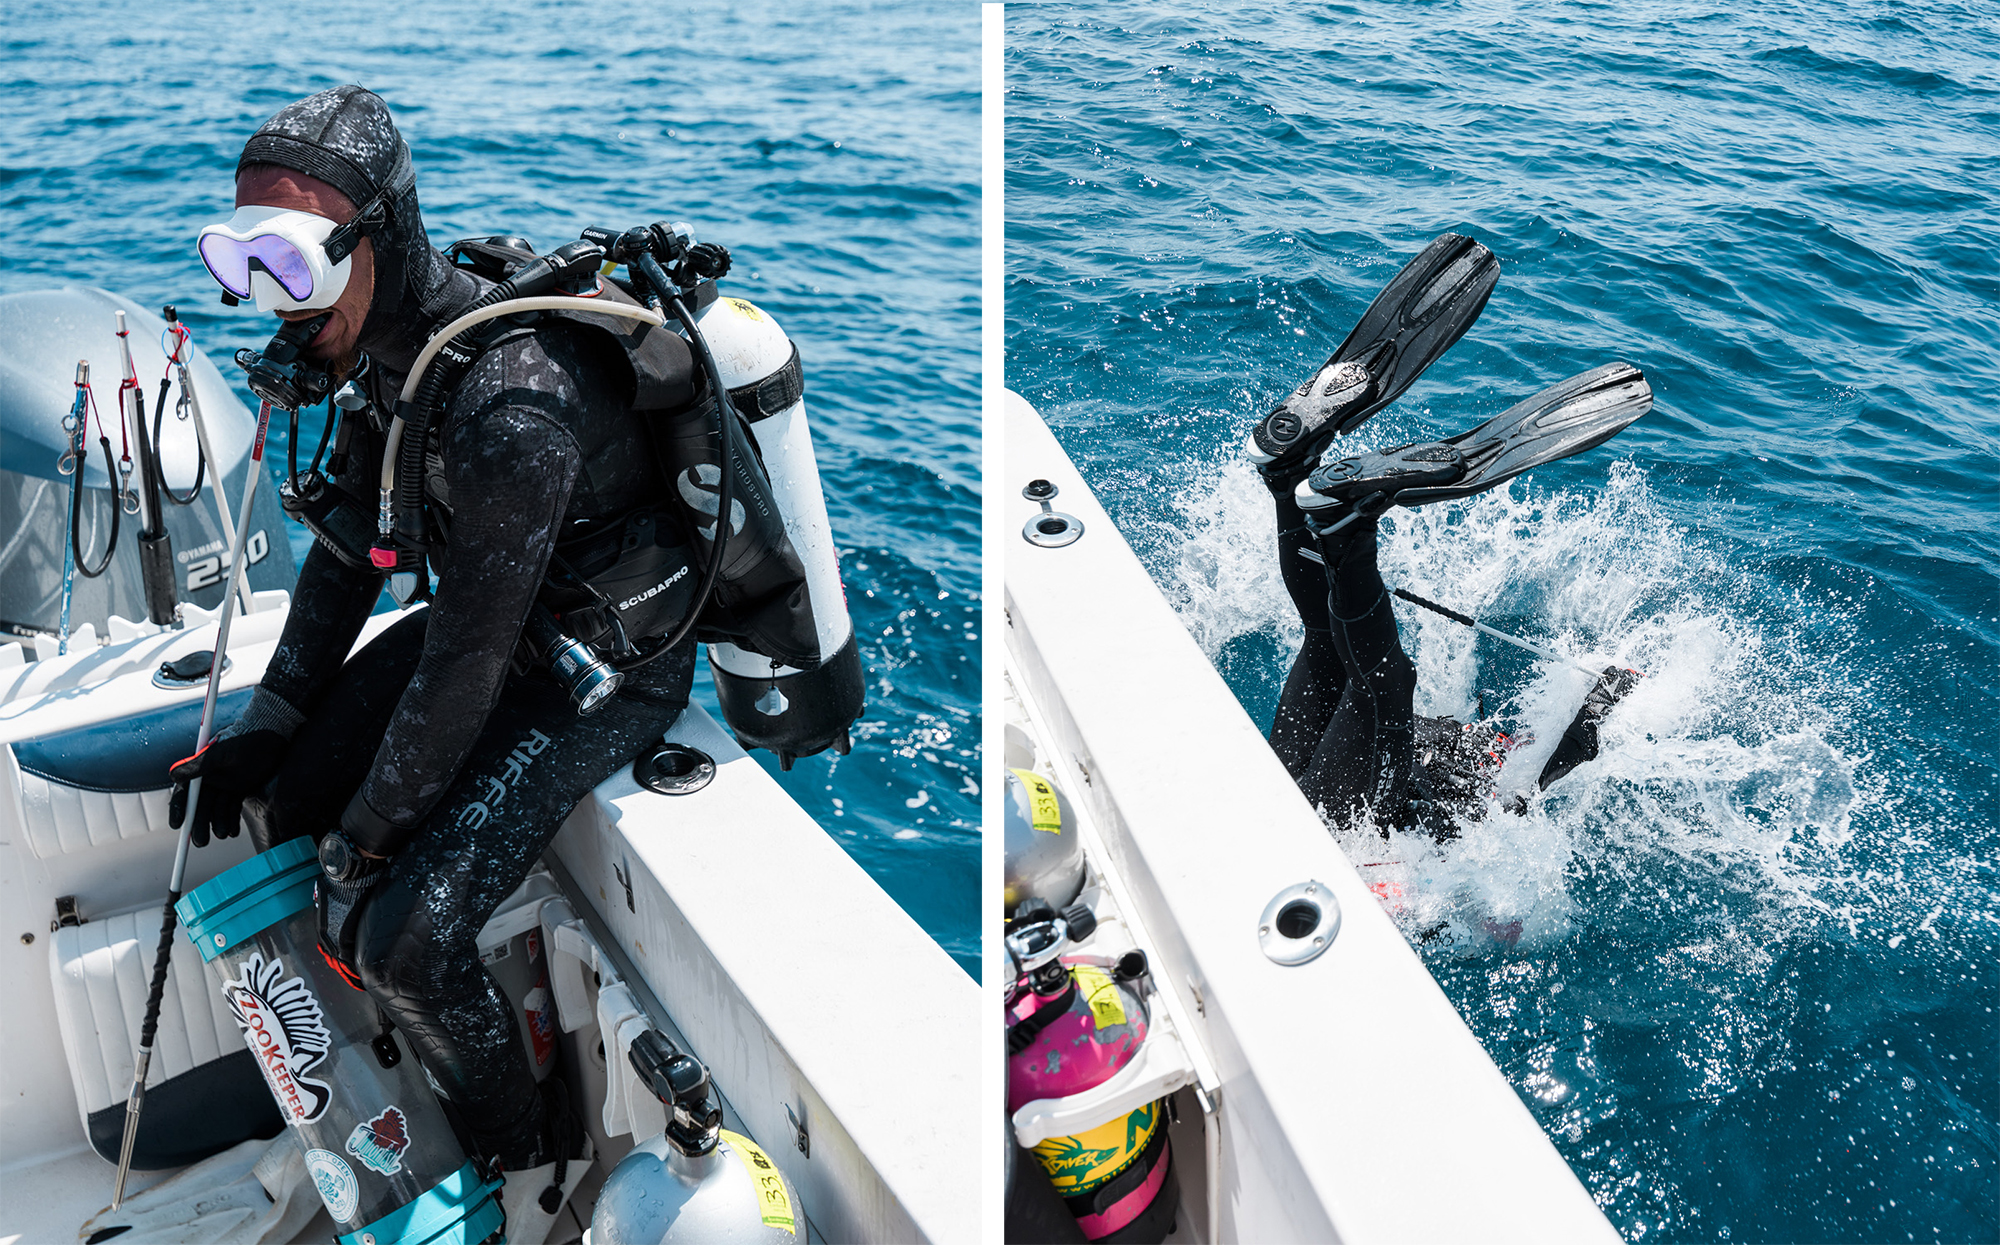 A lionfish diver rolls off the boat into the water.